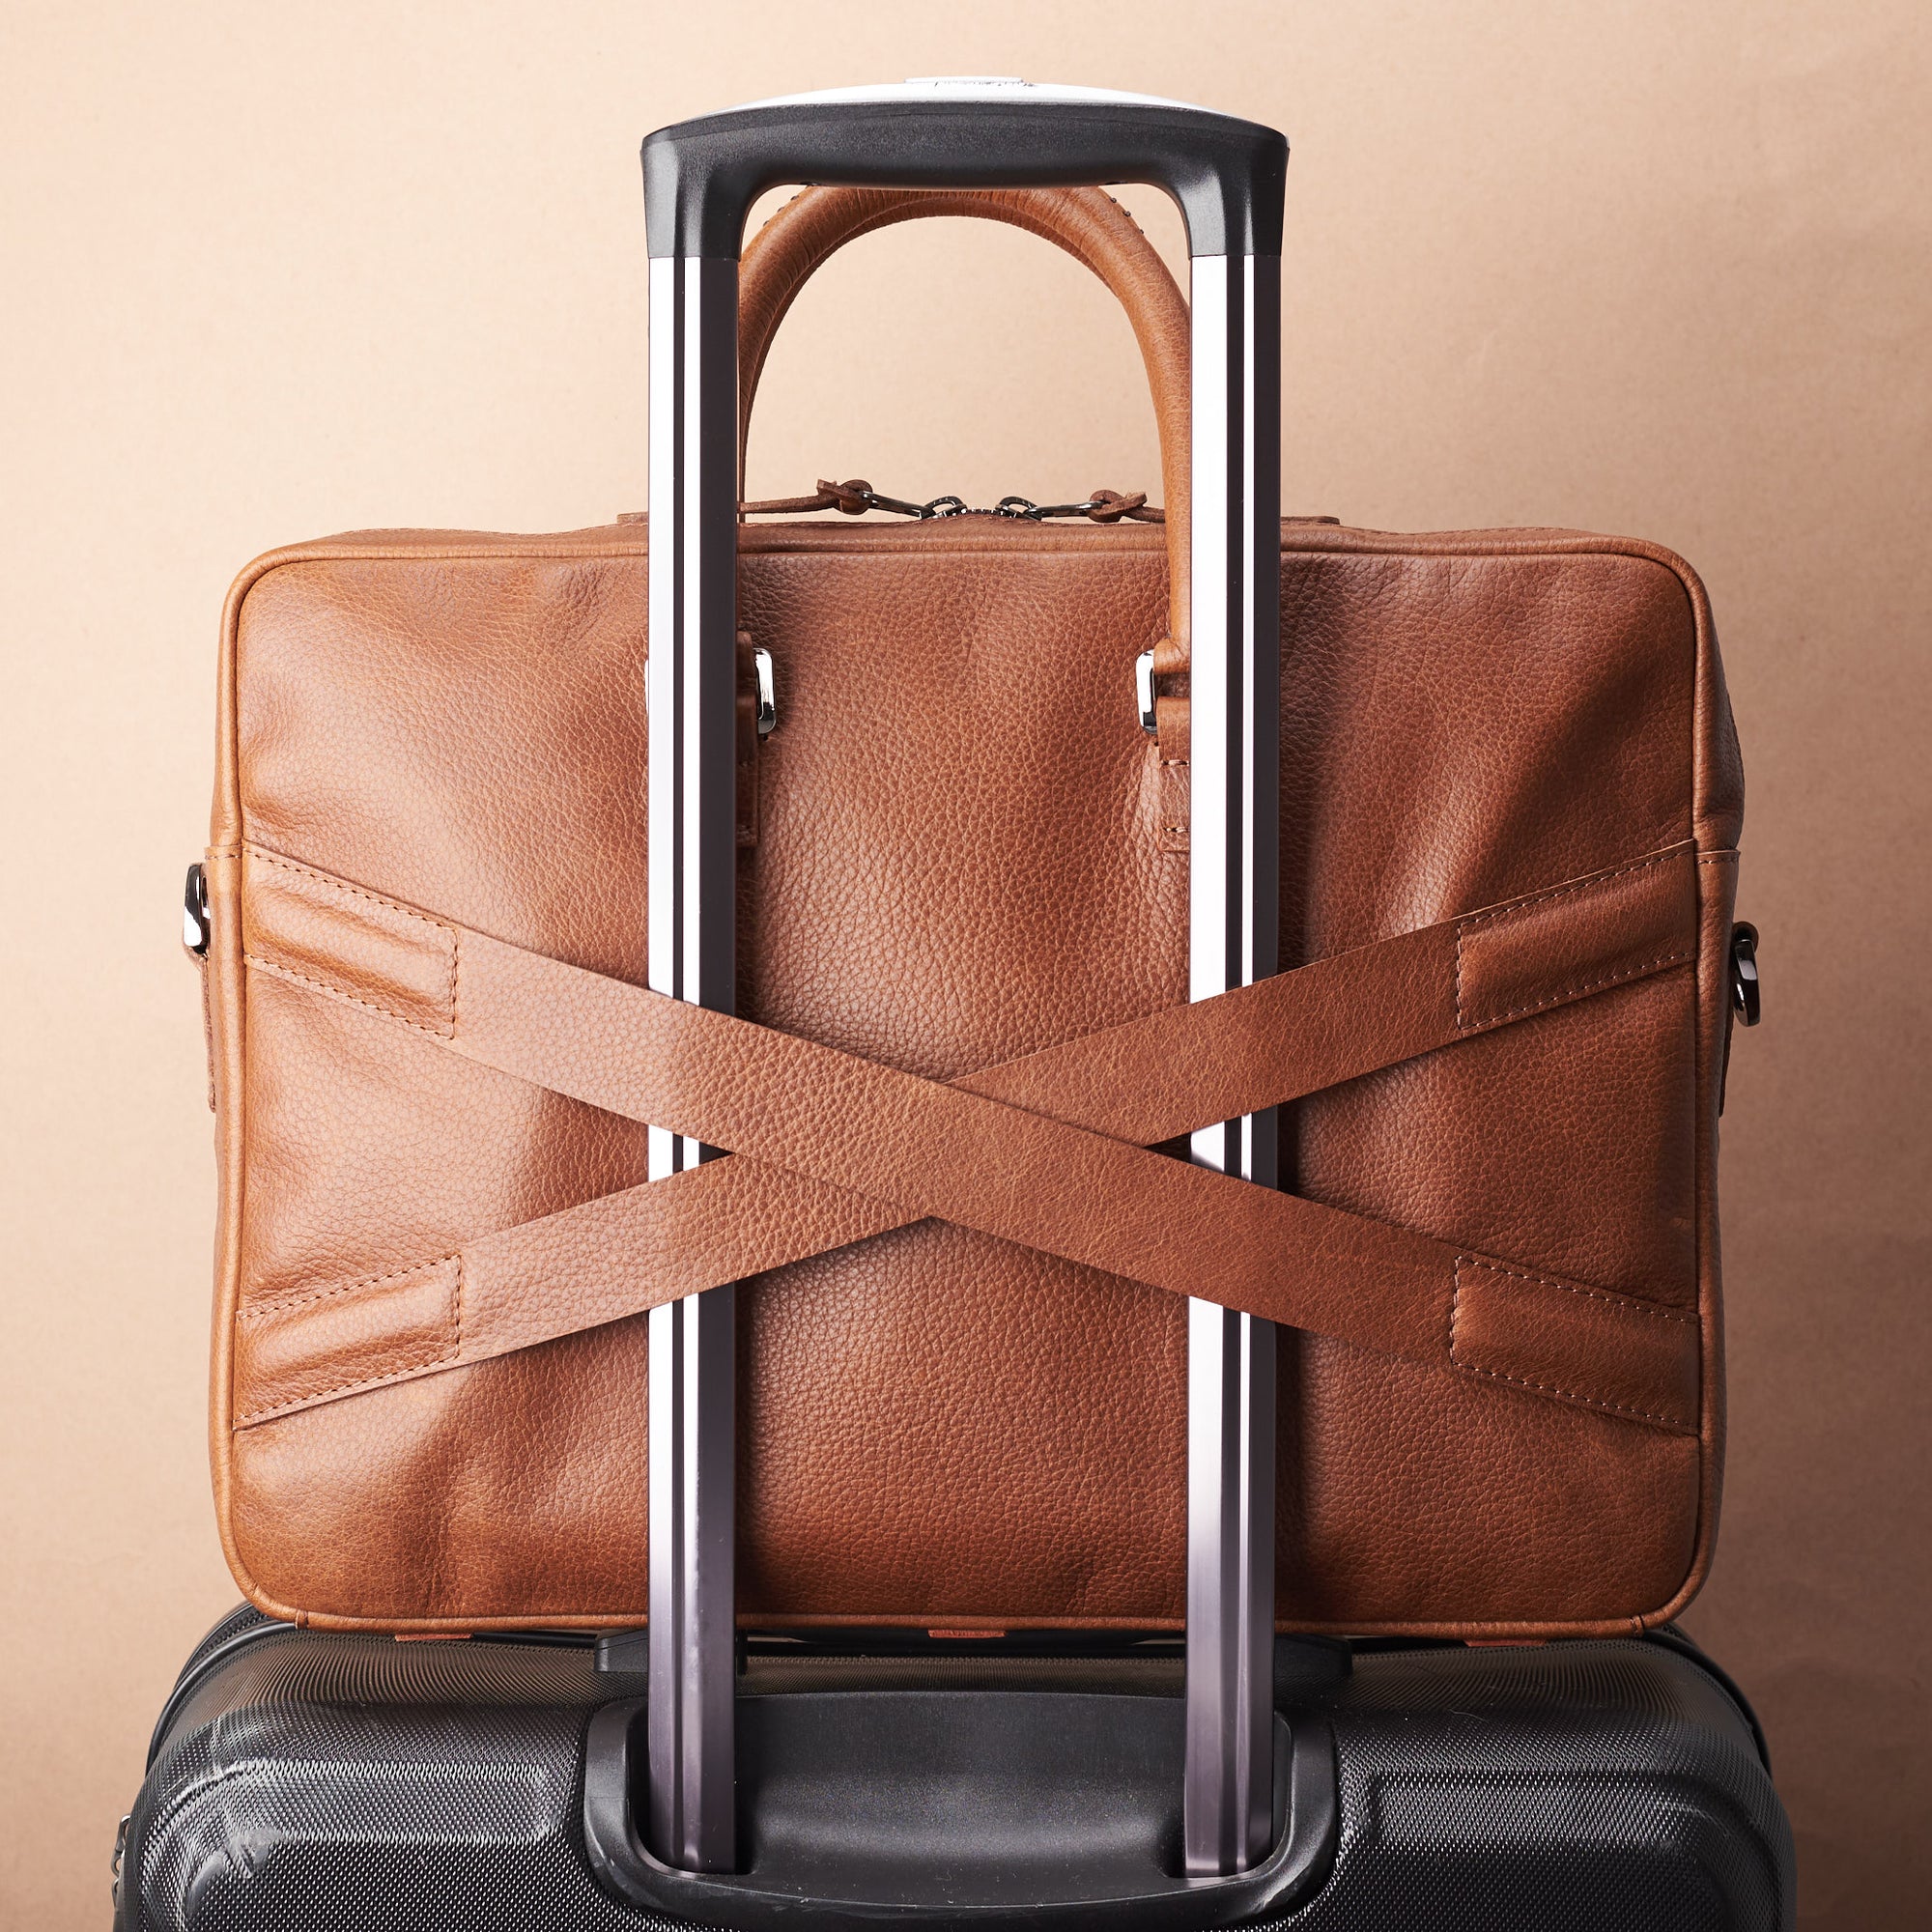 Luggage strap in x shape for messenger bag. Tan leather briefcase laptop bag for men. Gazeli laptop briefcase by Capra Leather.